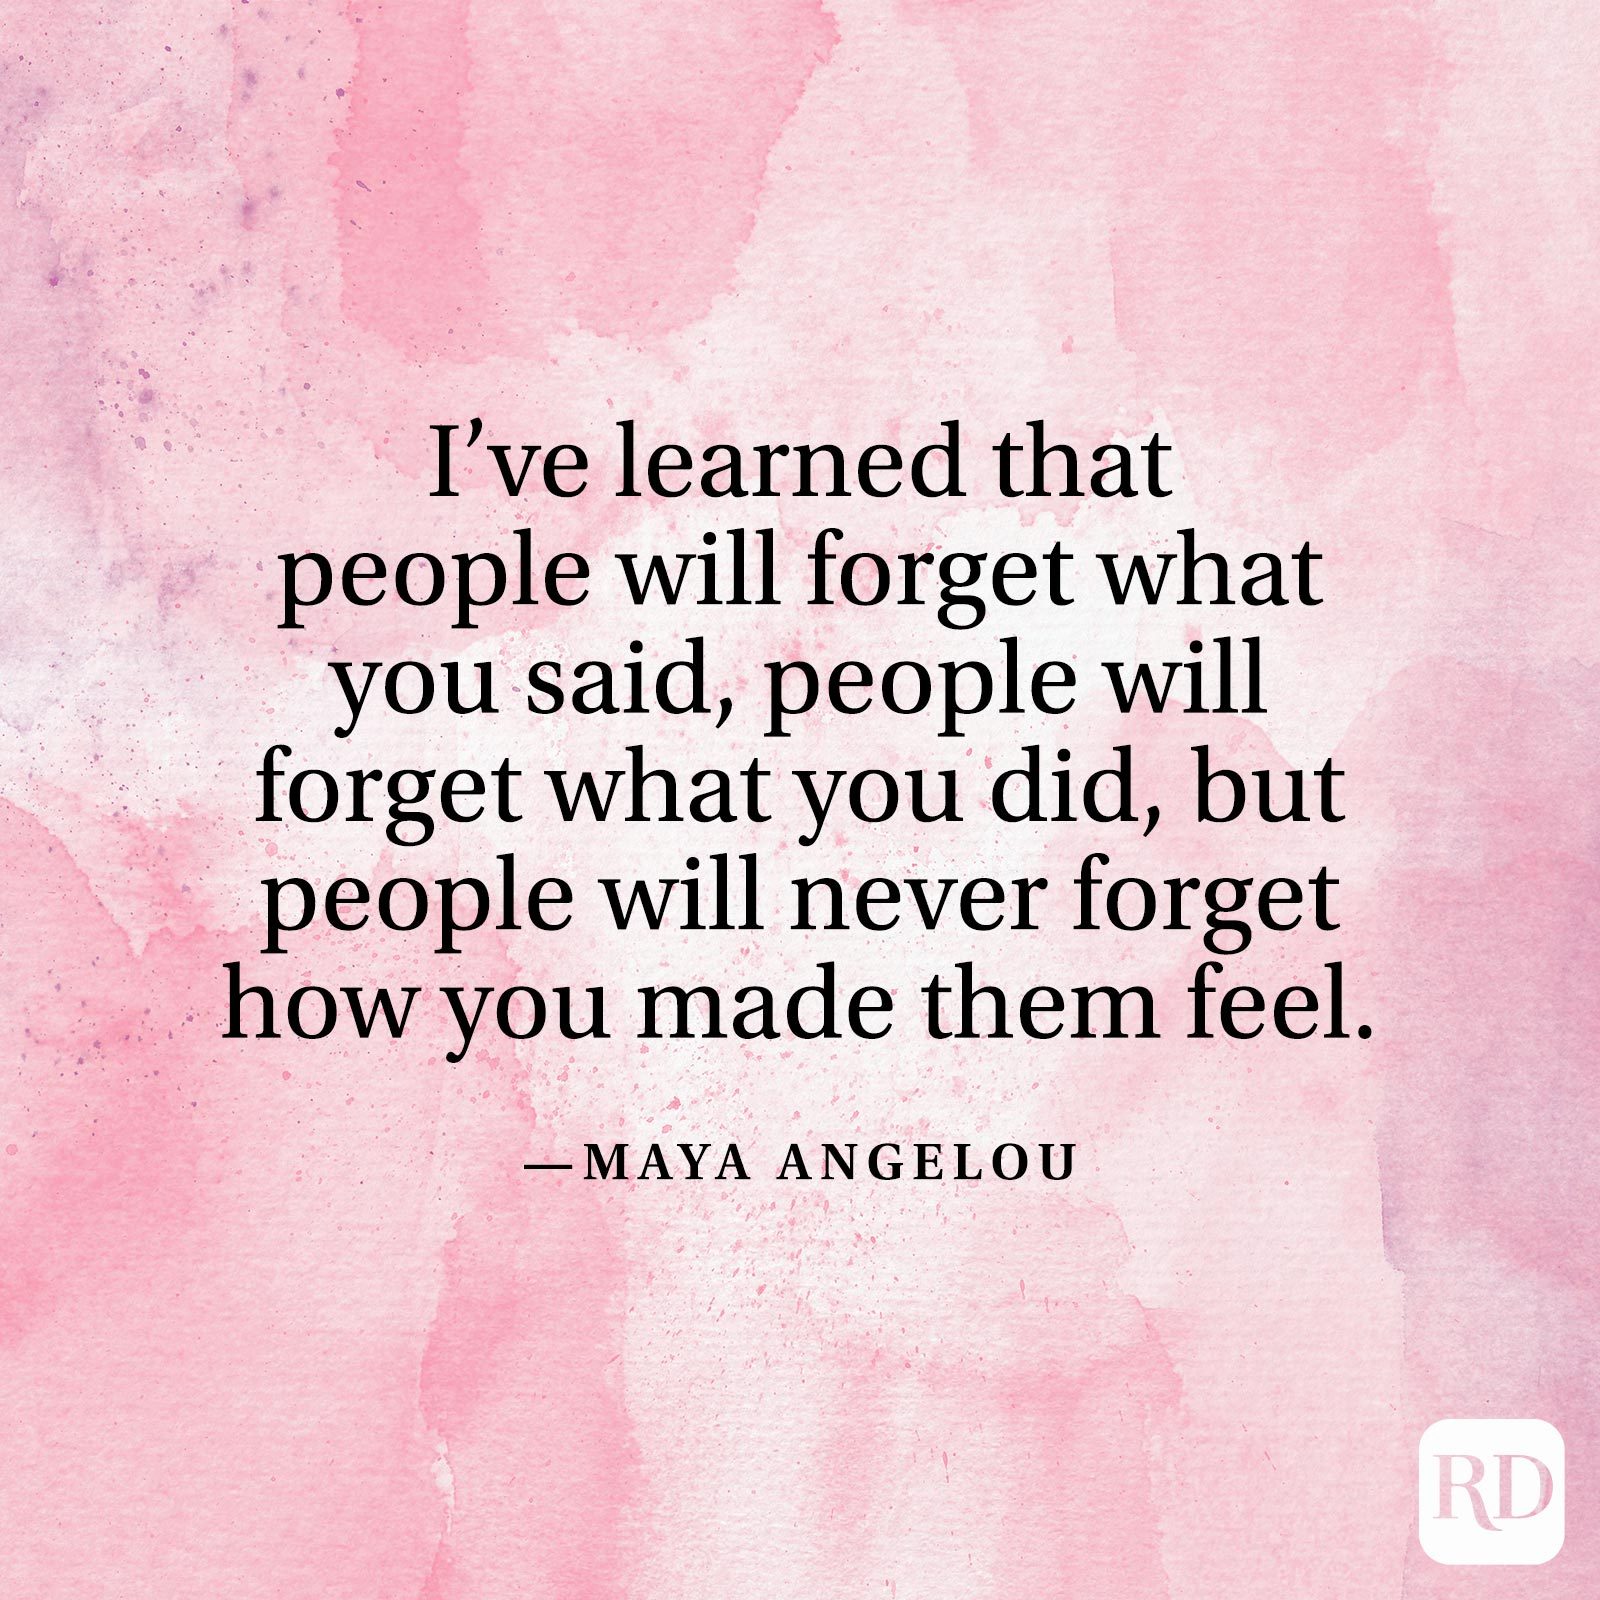 "I've learned that people will forget what you said, people will forget what you did, but people will never forget how you made them feel." —Maya Angelou